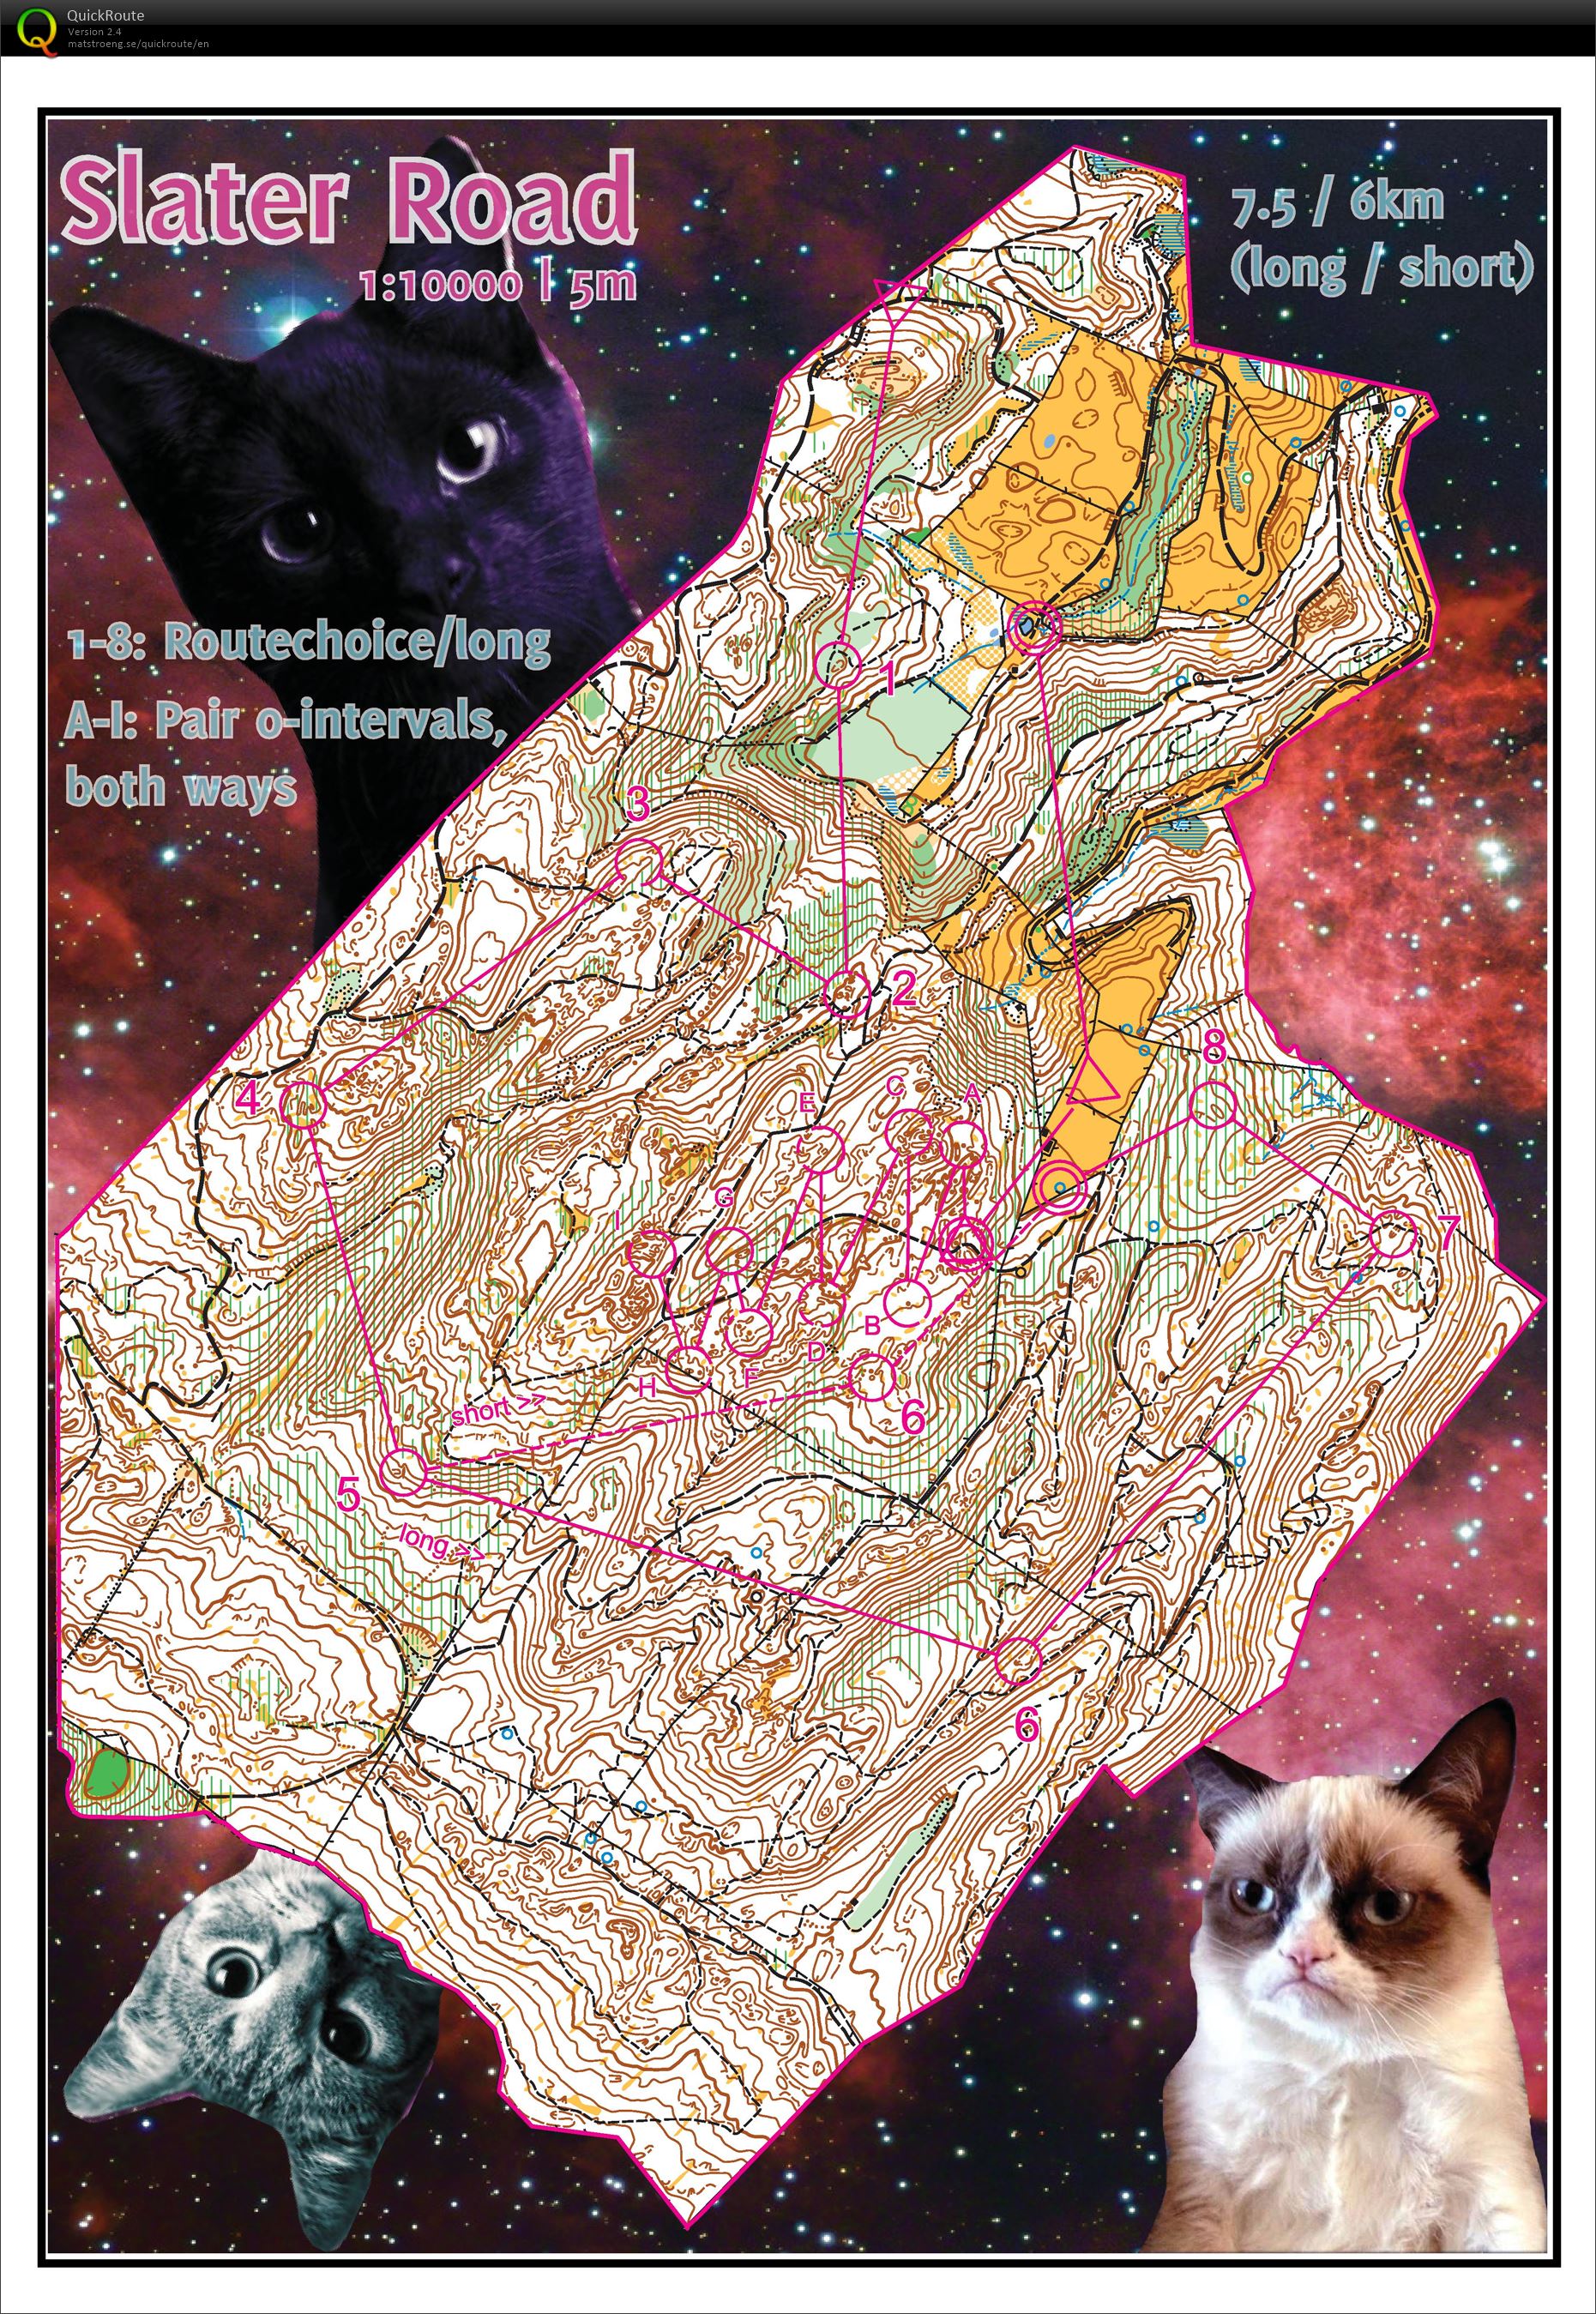 Space Cats - Part 2 (26.04.2014)